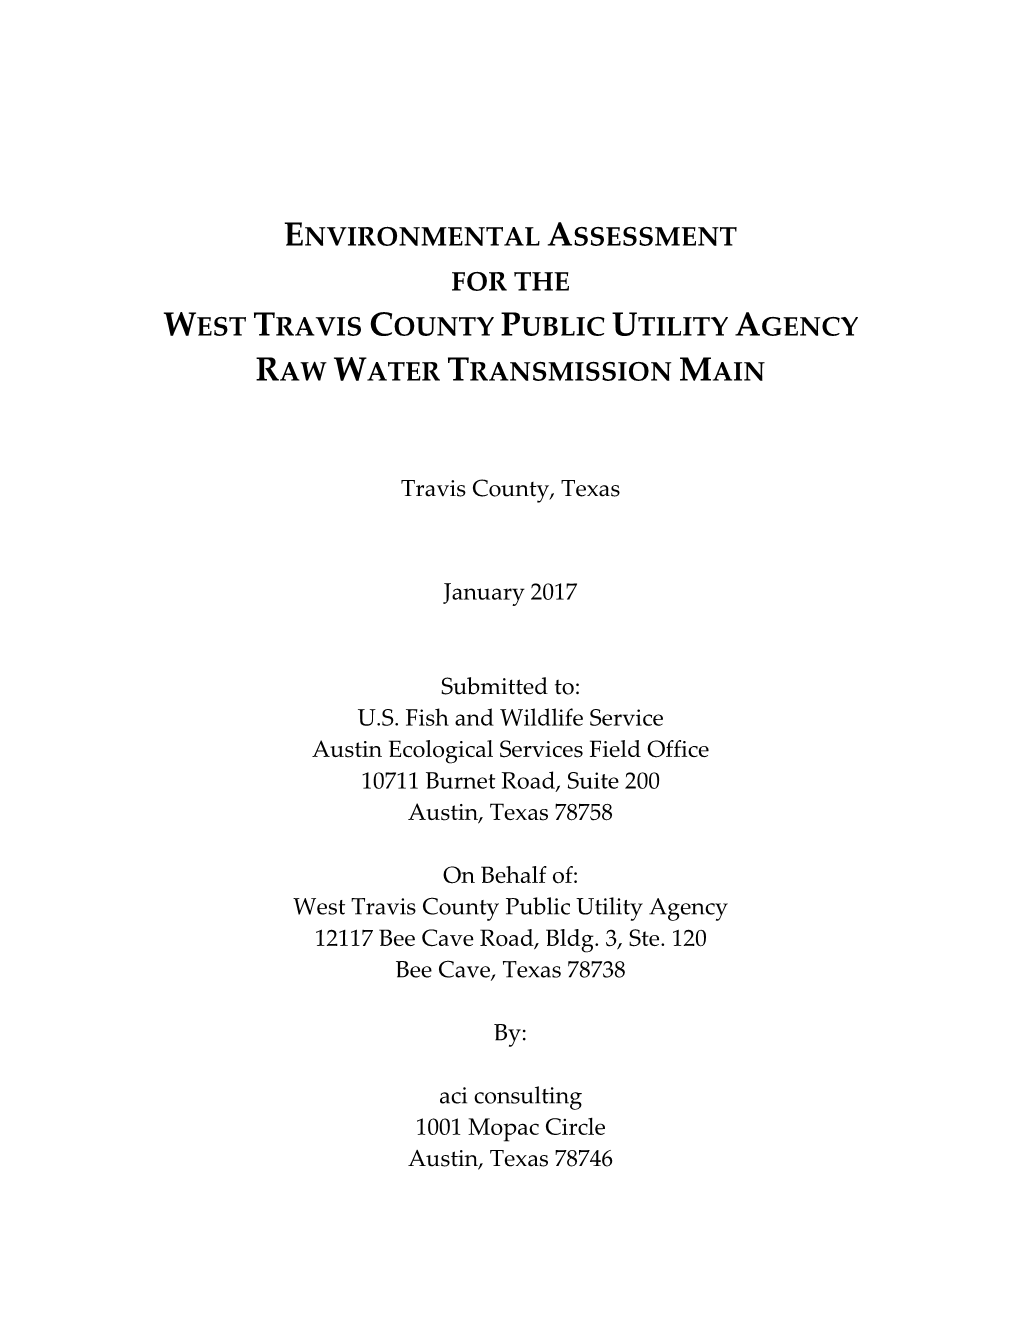 Environmental Assessment for the West Travis County Public Utility Agency Raw Water Transmission Main